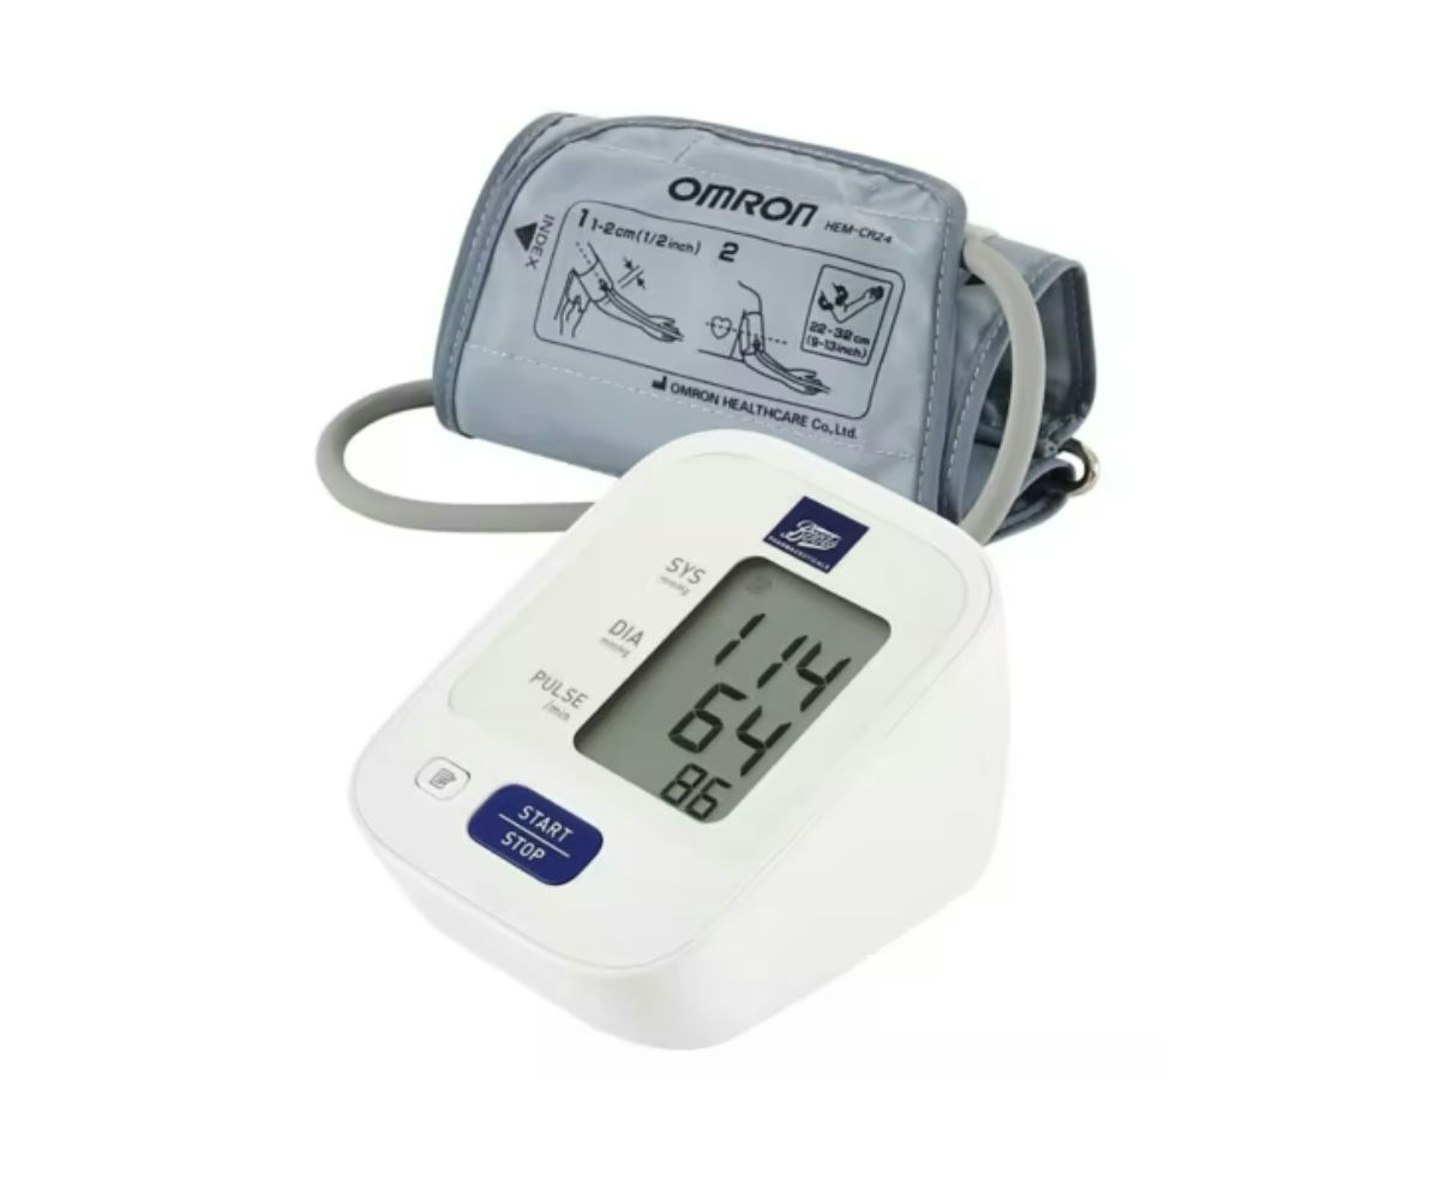 Rechargeable Convenient Easy Digital Blood Pressure Meter with Big Screen